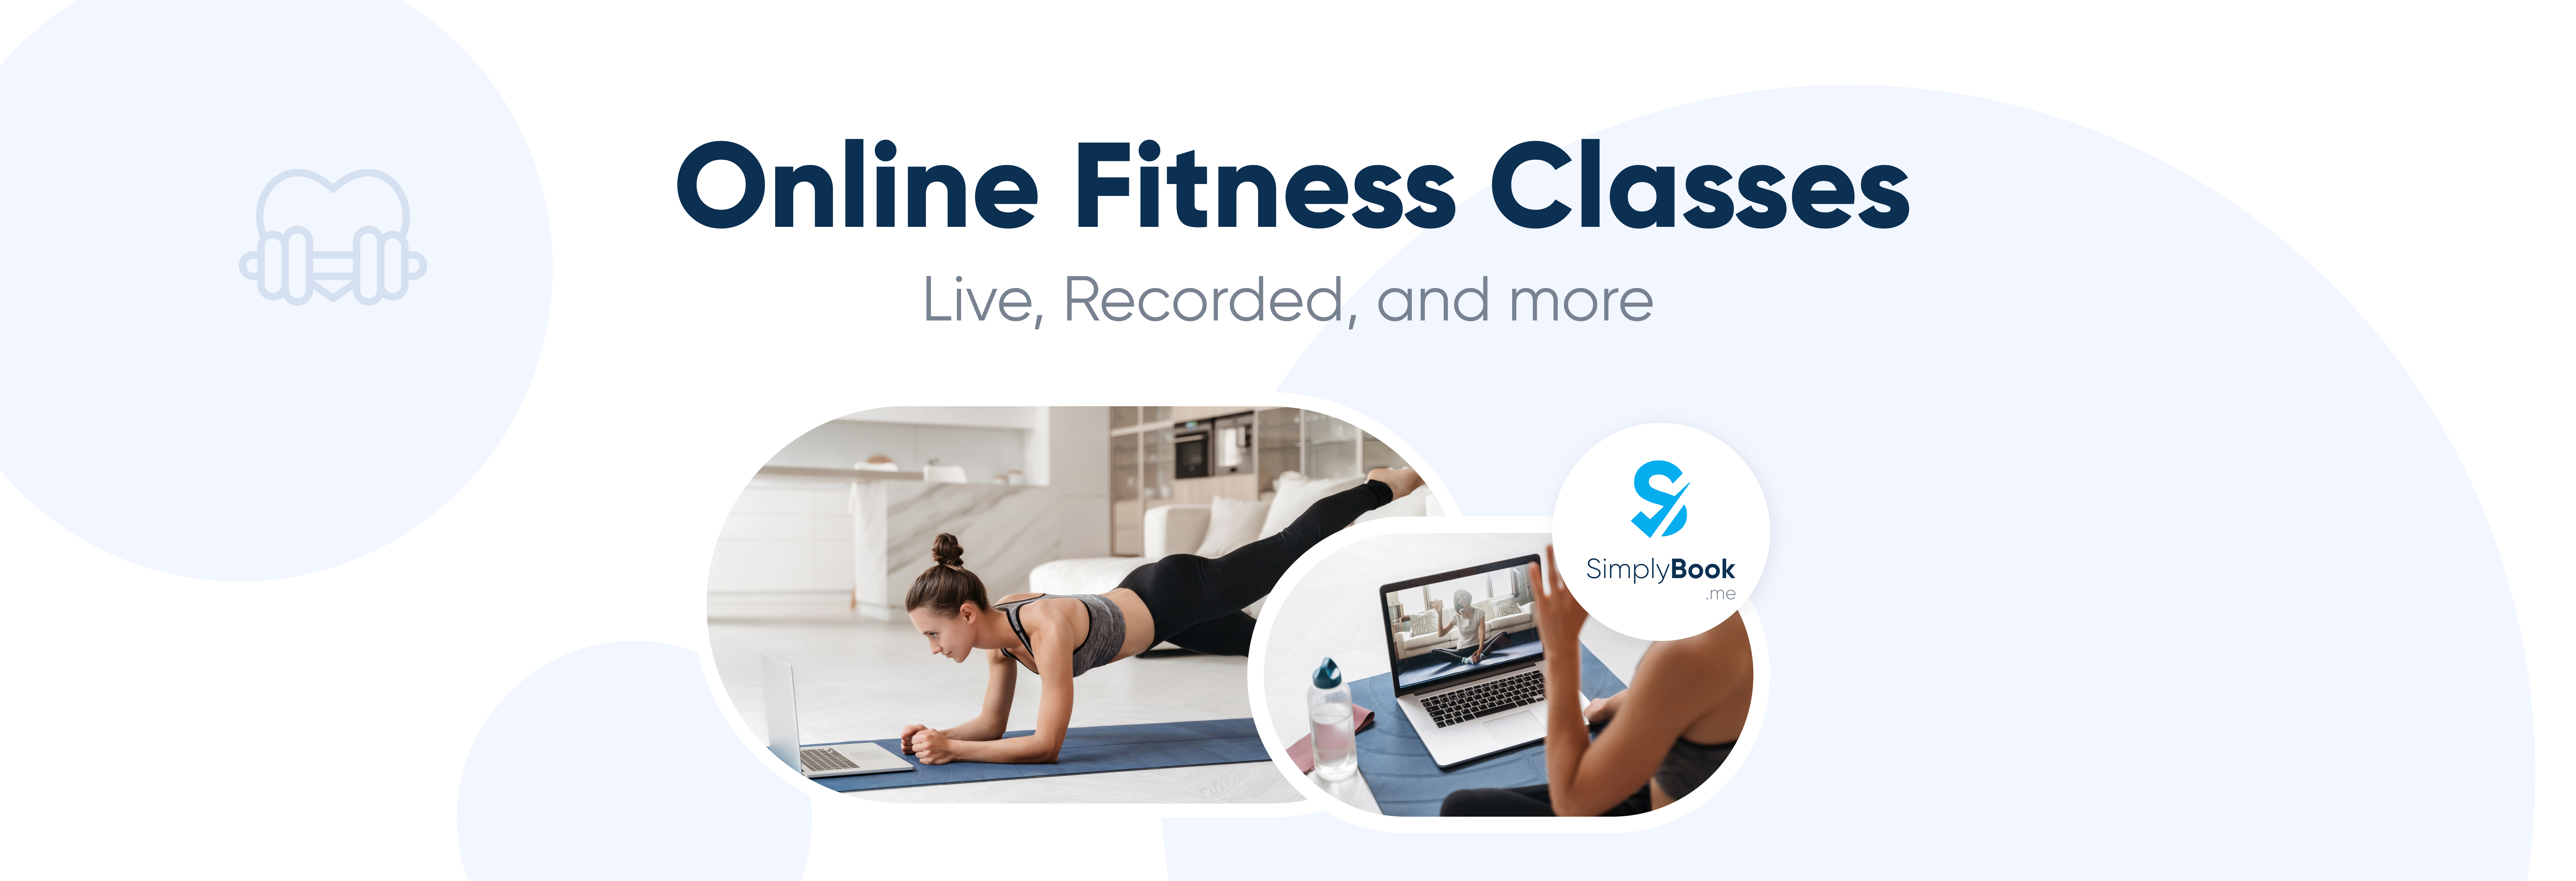 online fintess classes and training programmes